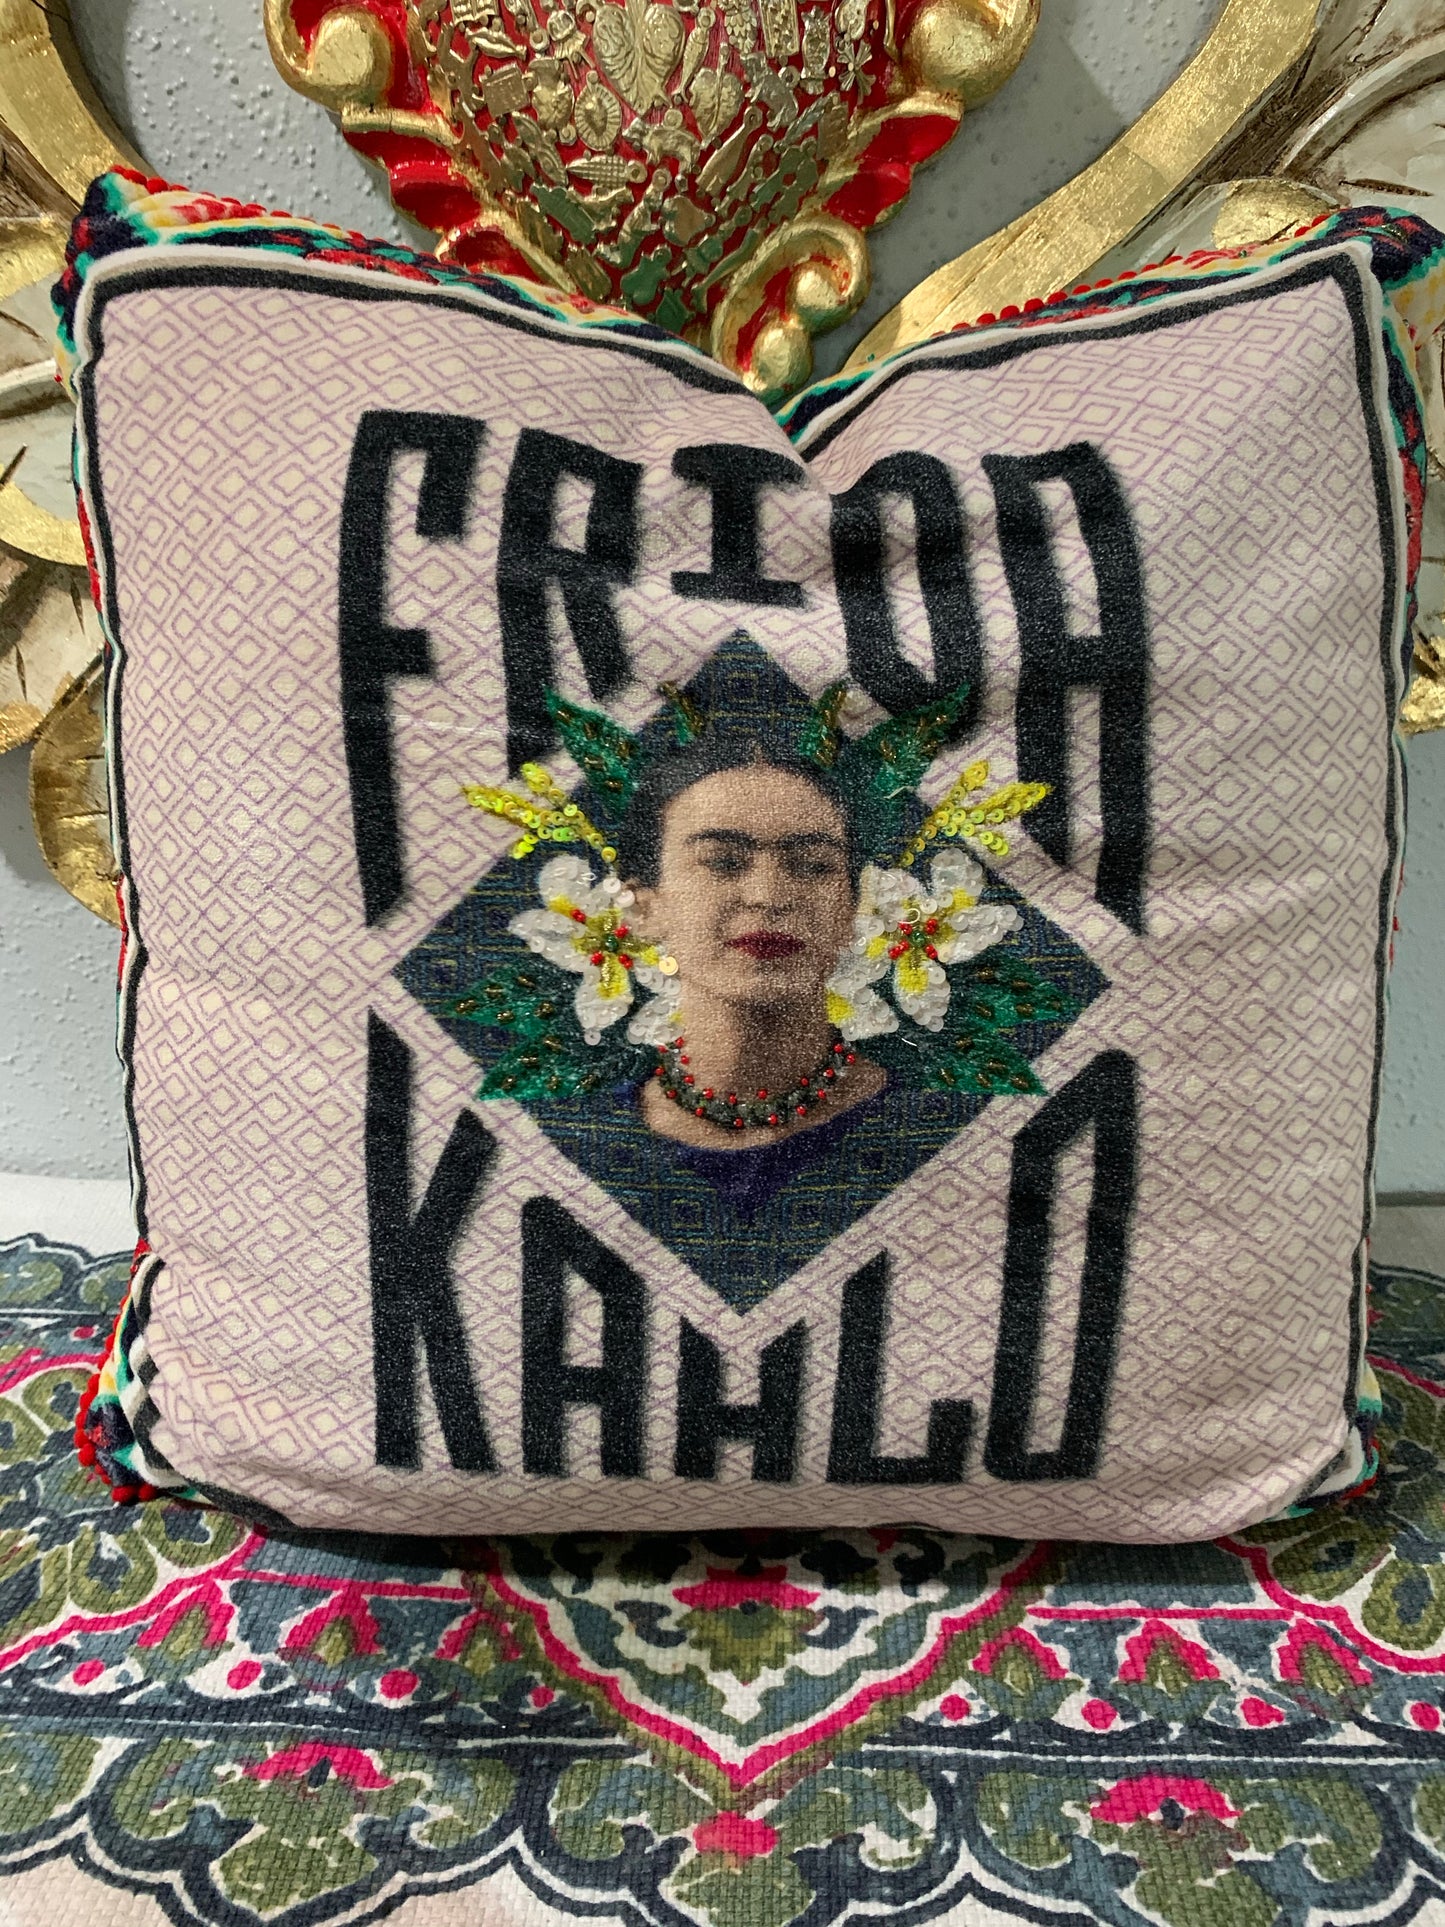 Frida Embroidery Pillow